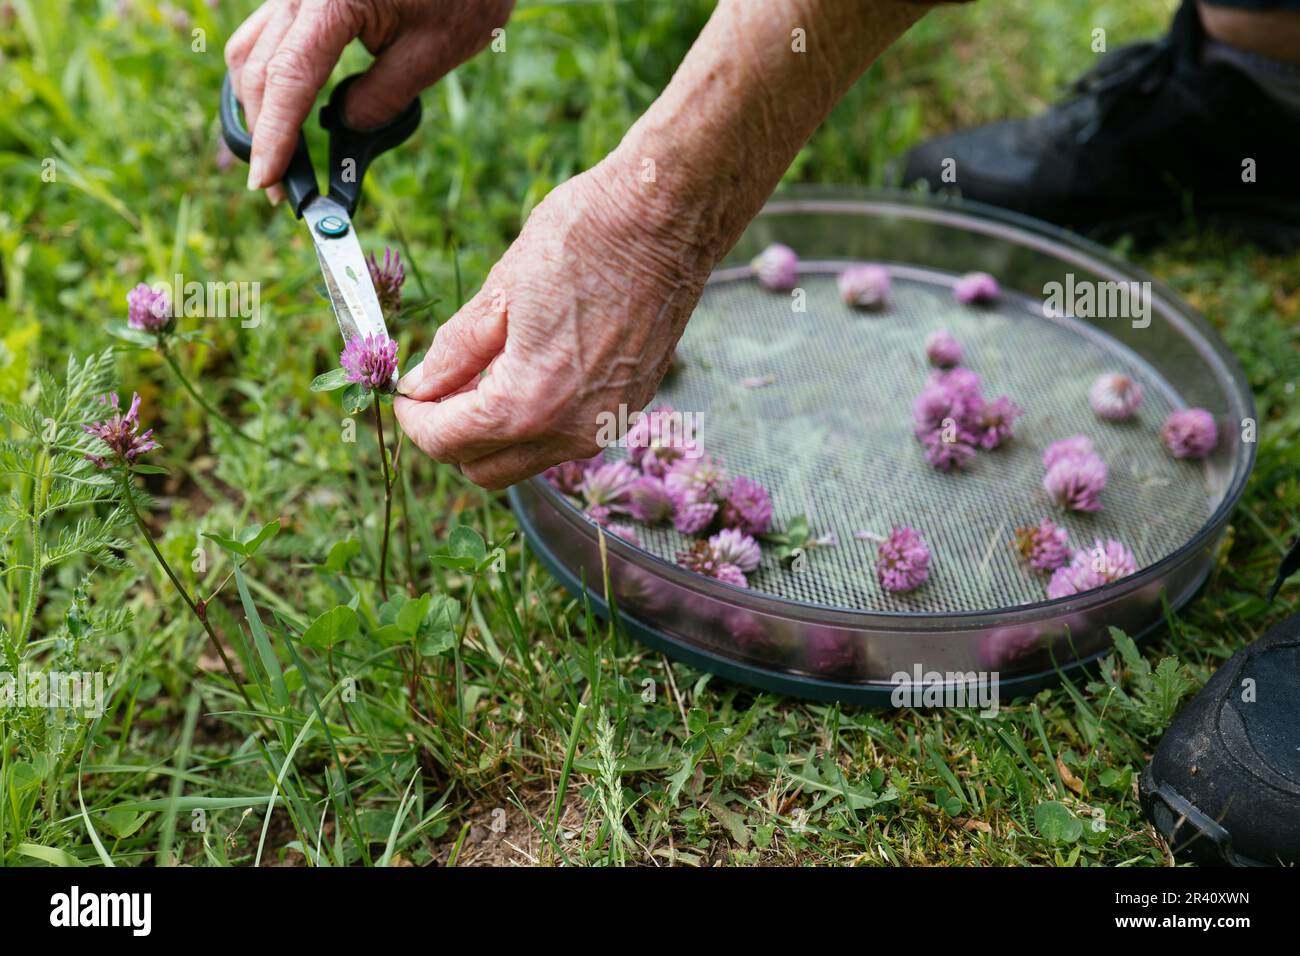 Woman collecting red clover (Trifolium pratense) blossoms in a garden to make a skin care lotion. Stock Photo